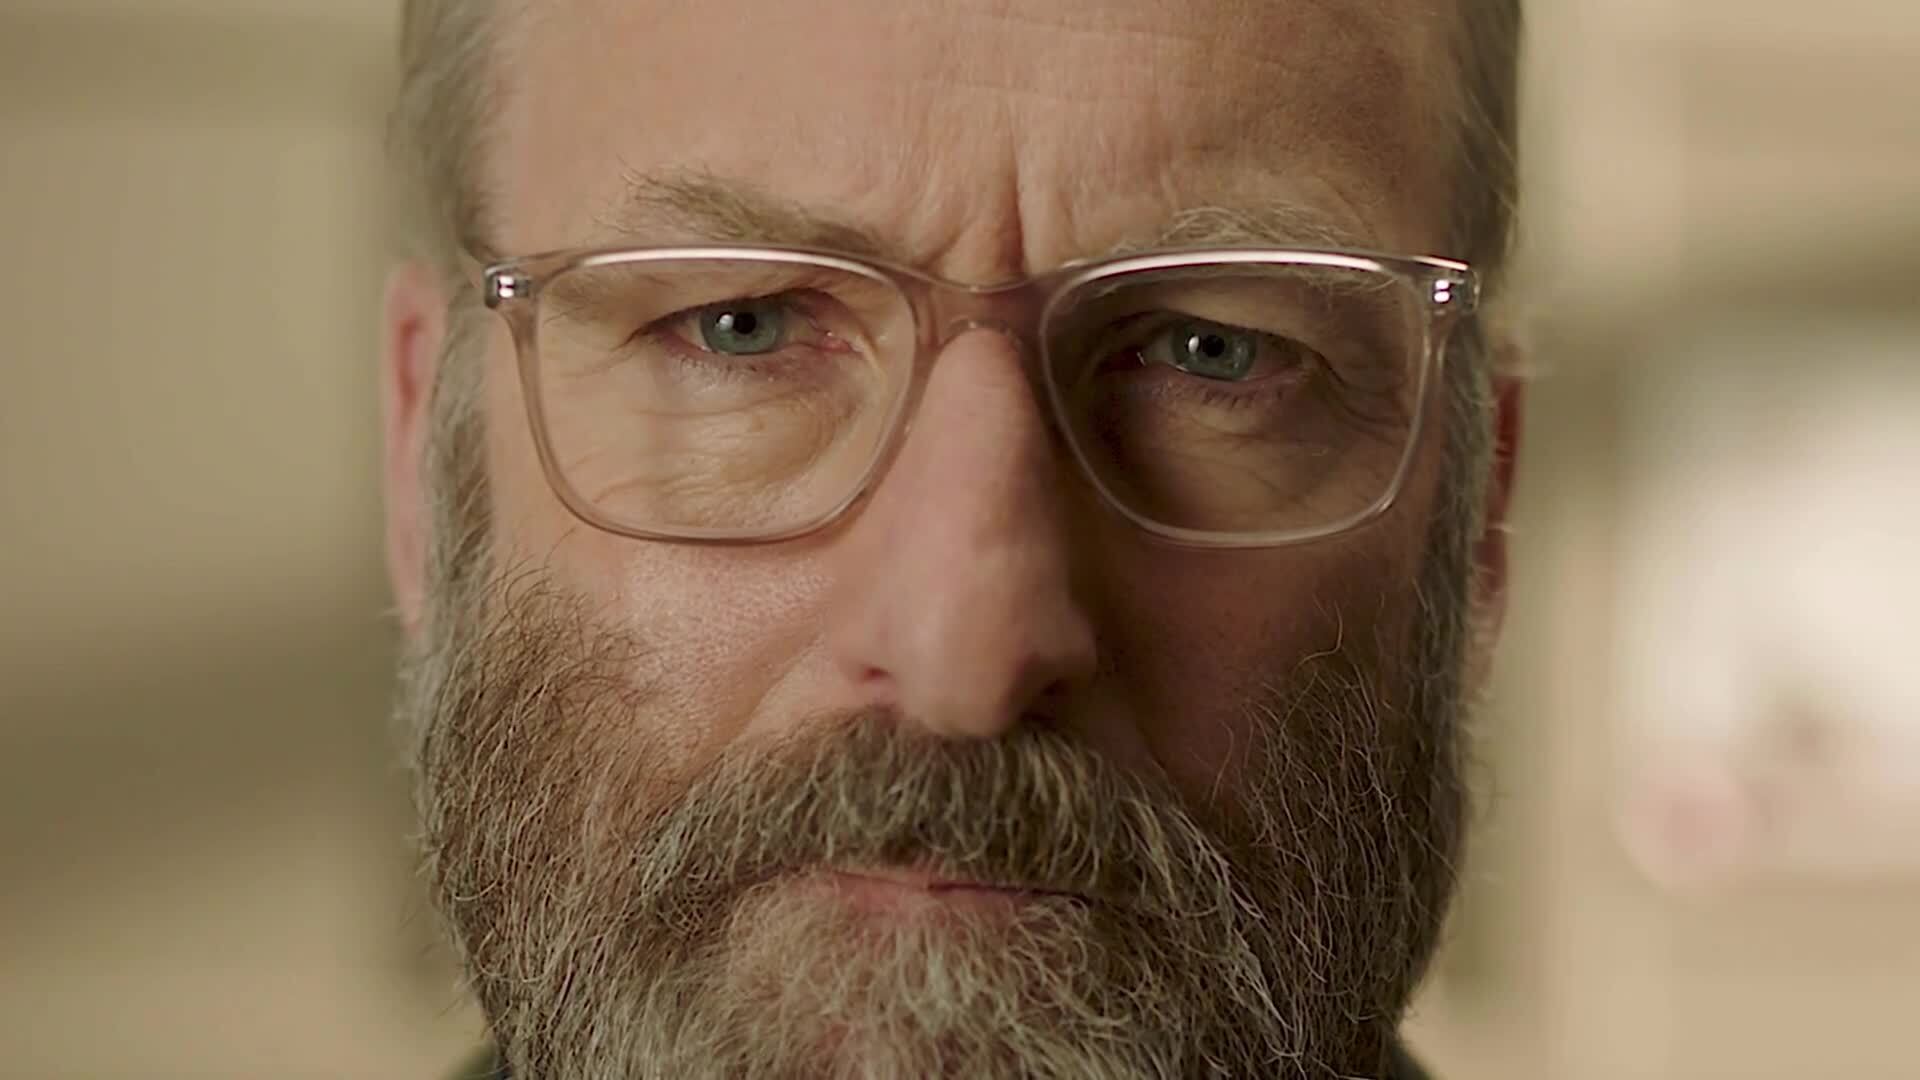 Lucky Hank Teaser: New Series Premieres March 19, Starring Emmy-nominated Bob Odenkirk (Better Call Saul), Lucky Hank is a mid-life crisis tale about the unlikely chairman of the English department in a badly underfunded college in the Pennsylvania rust belt. The new series premieres March 19 on AMC and AMC+.